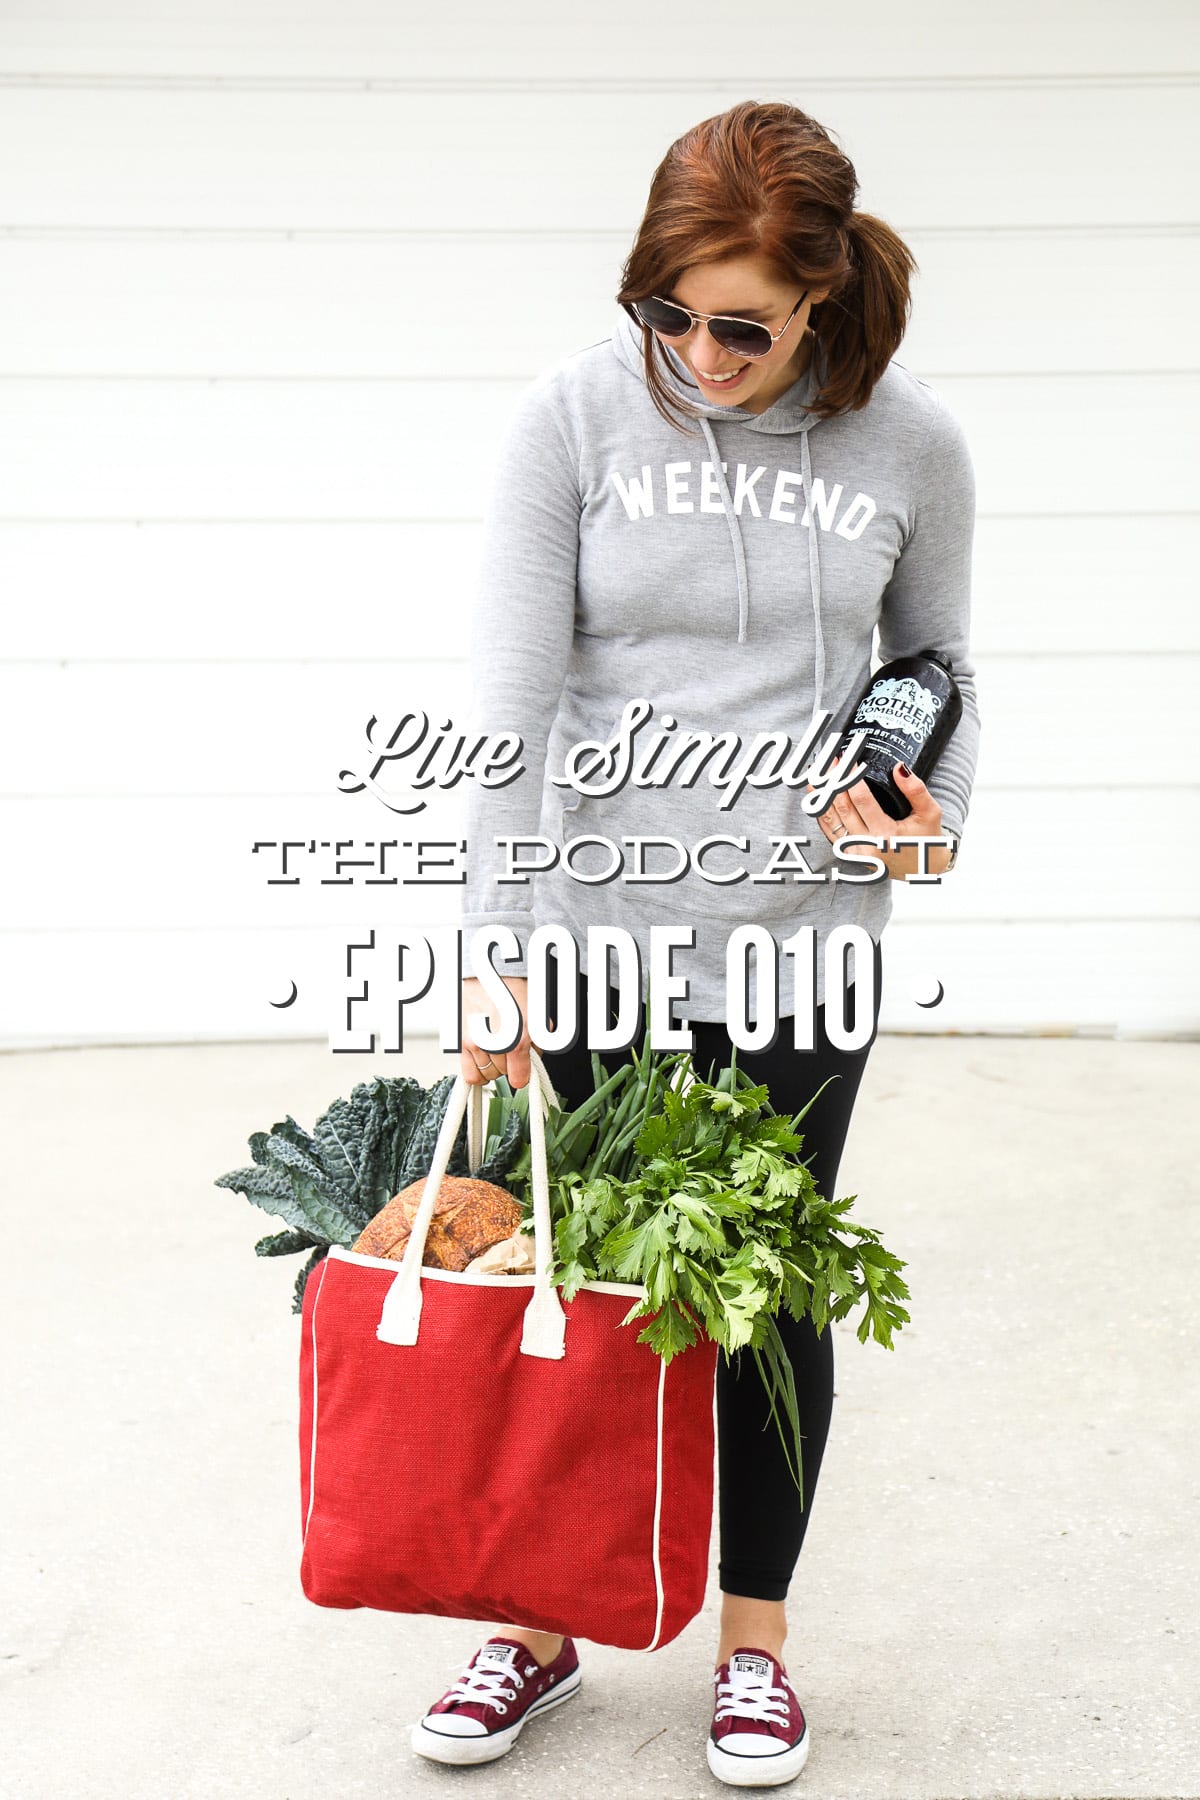 Podcast 010: Community Response, “How Do I get Started with Real Food When My Family Loves Processed Food?”